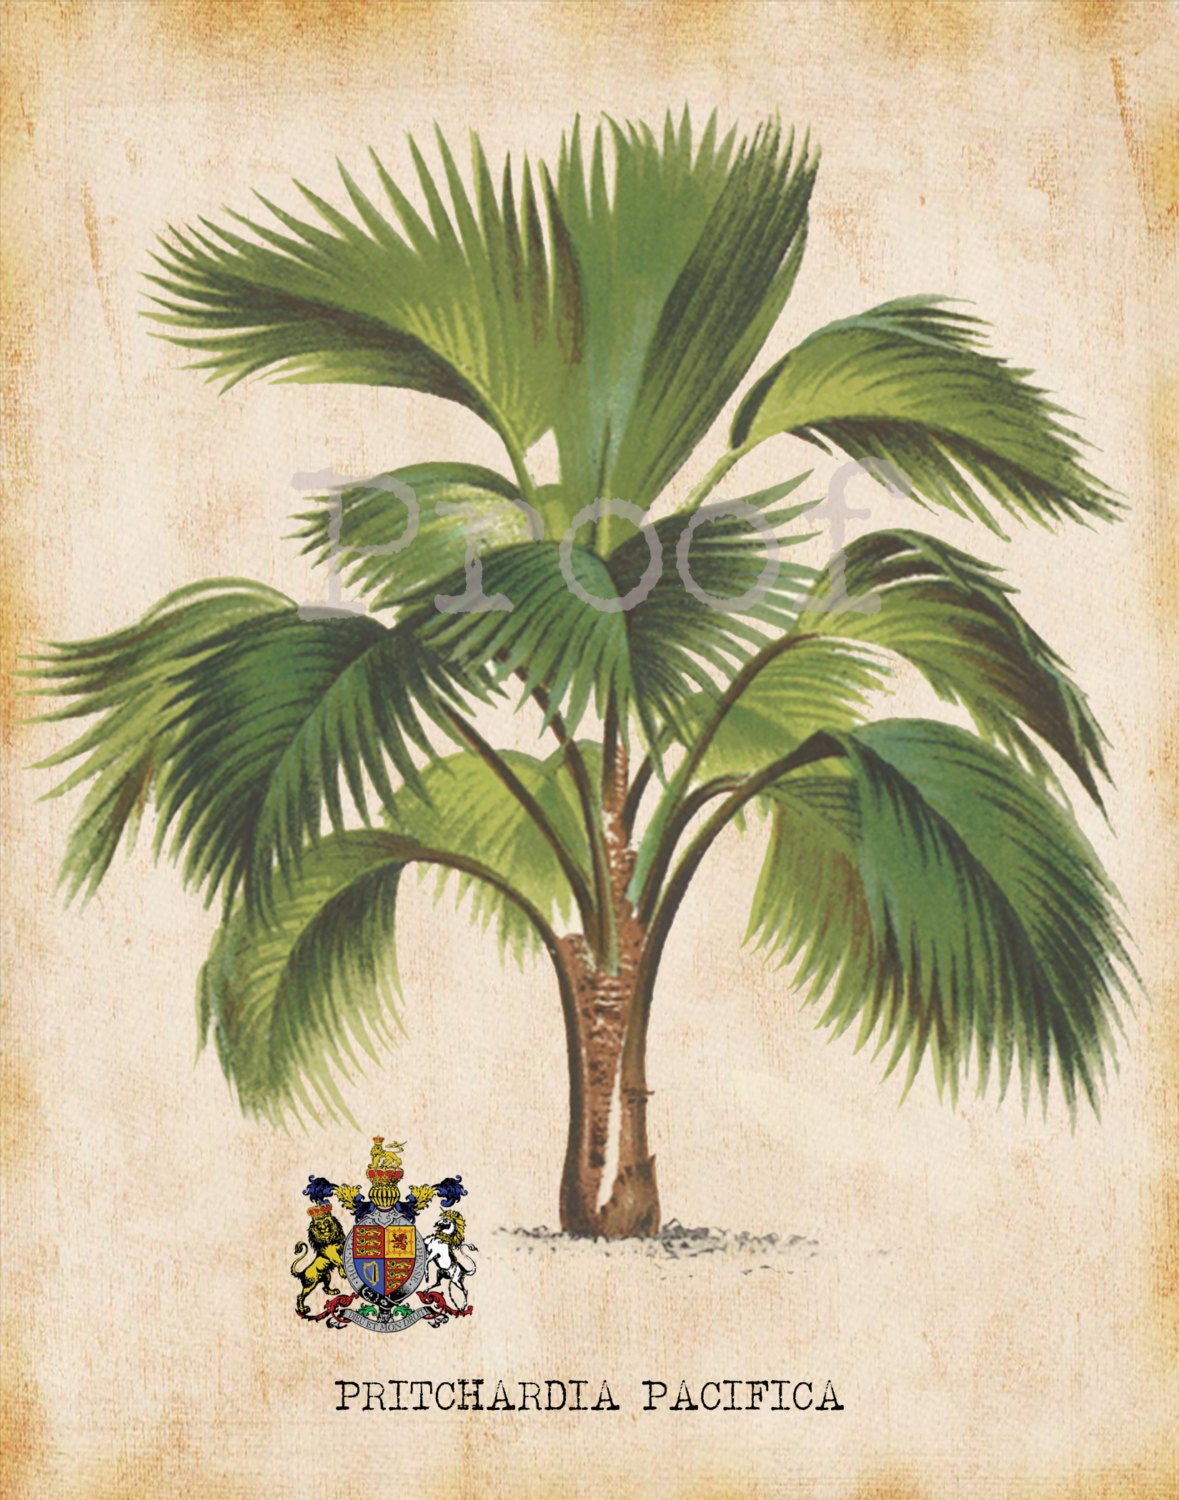 Antique Palm Tree Art Prints Set For You To Print 8" x 10" & 11" x 14" Tropical Palms Wall Decor Botanical Print Picture Instant Download